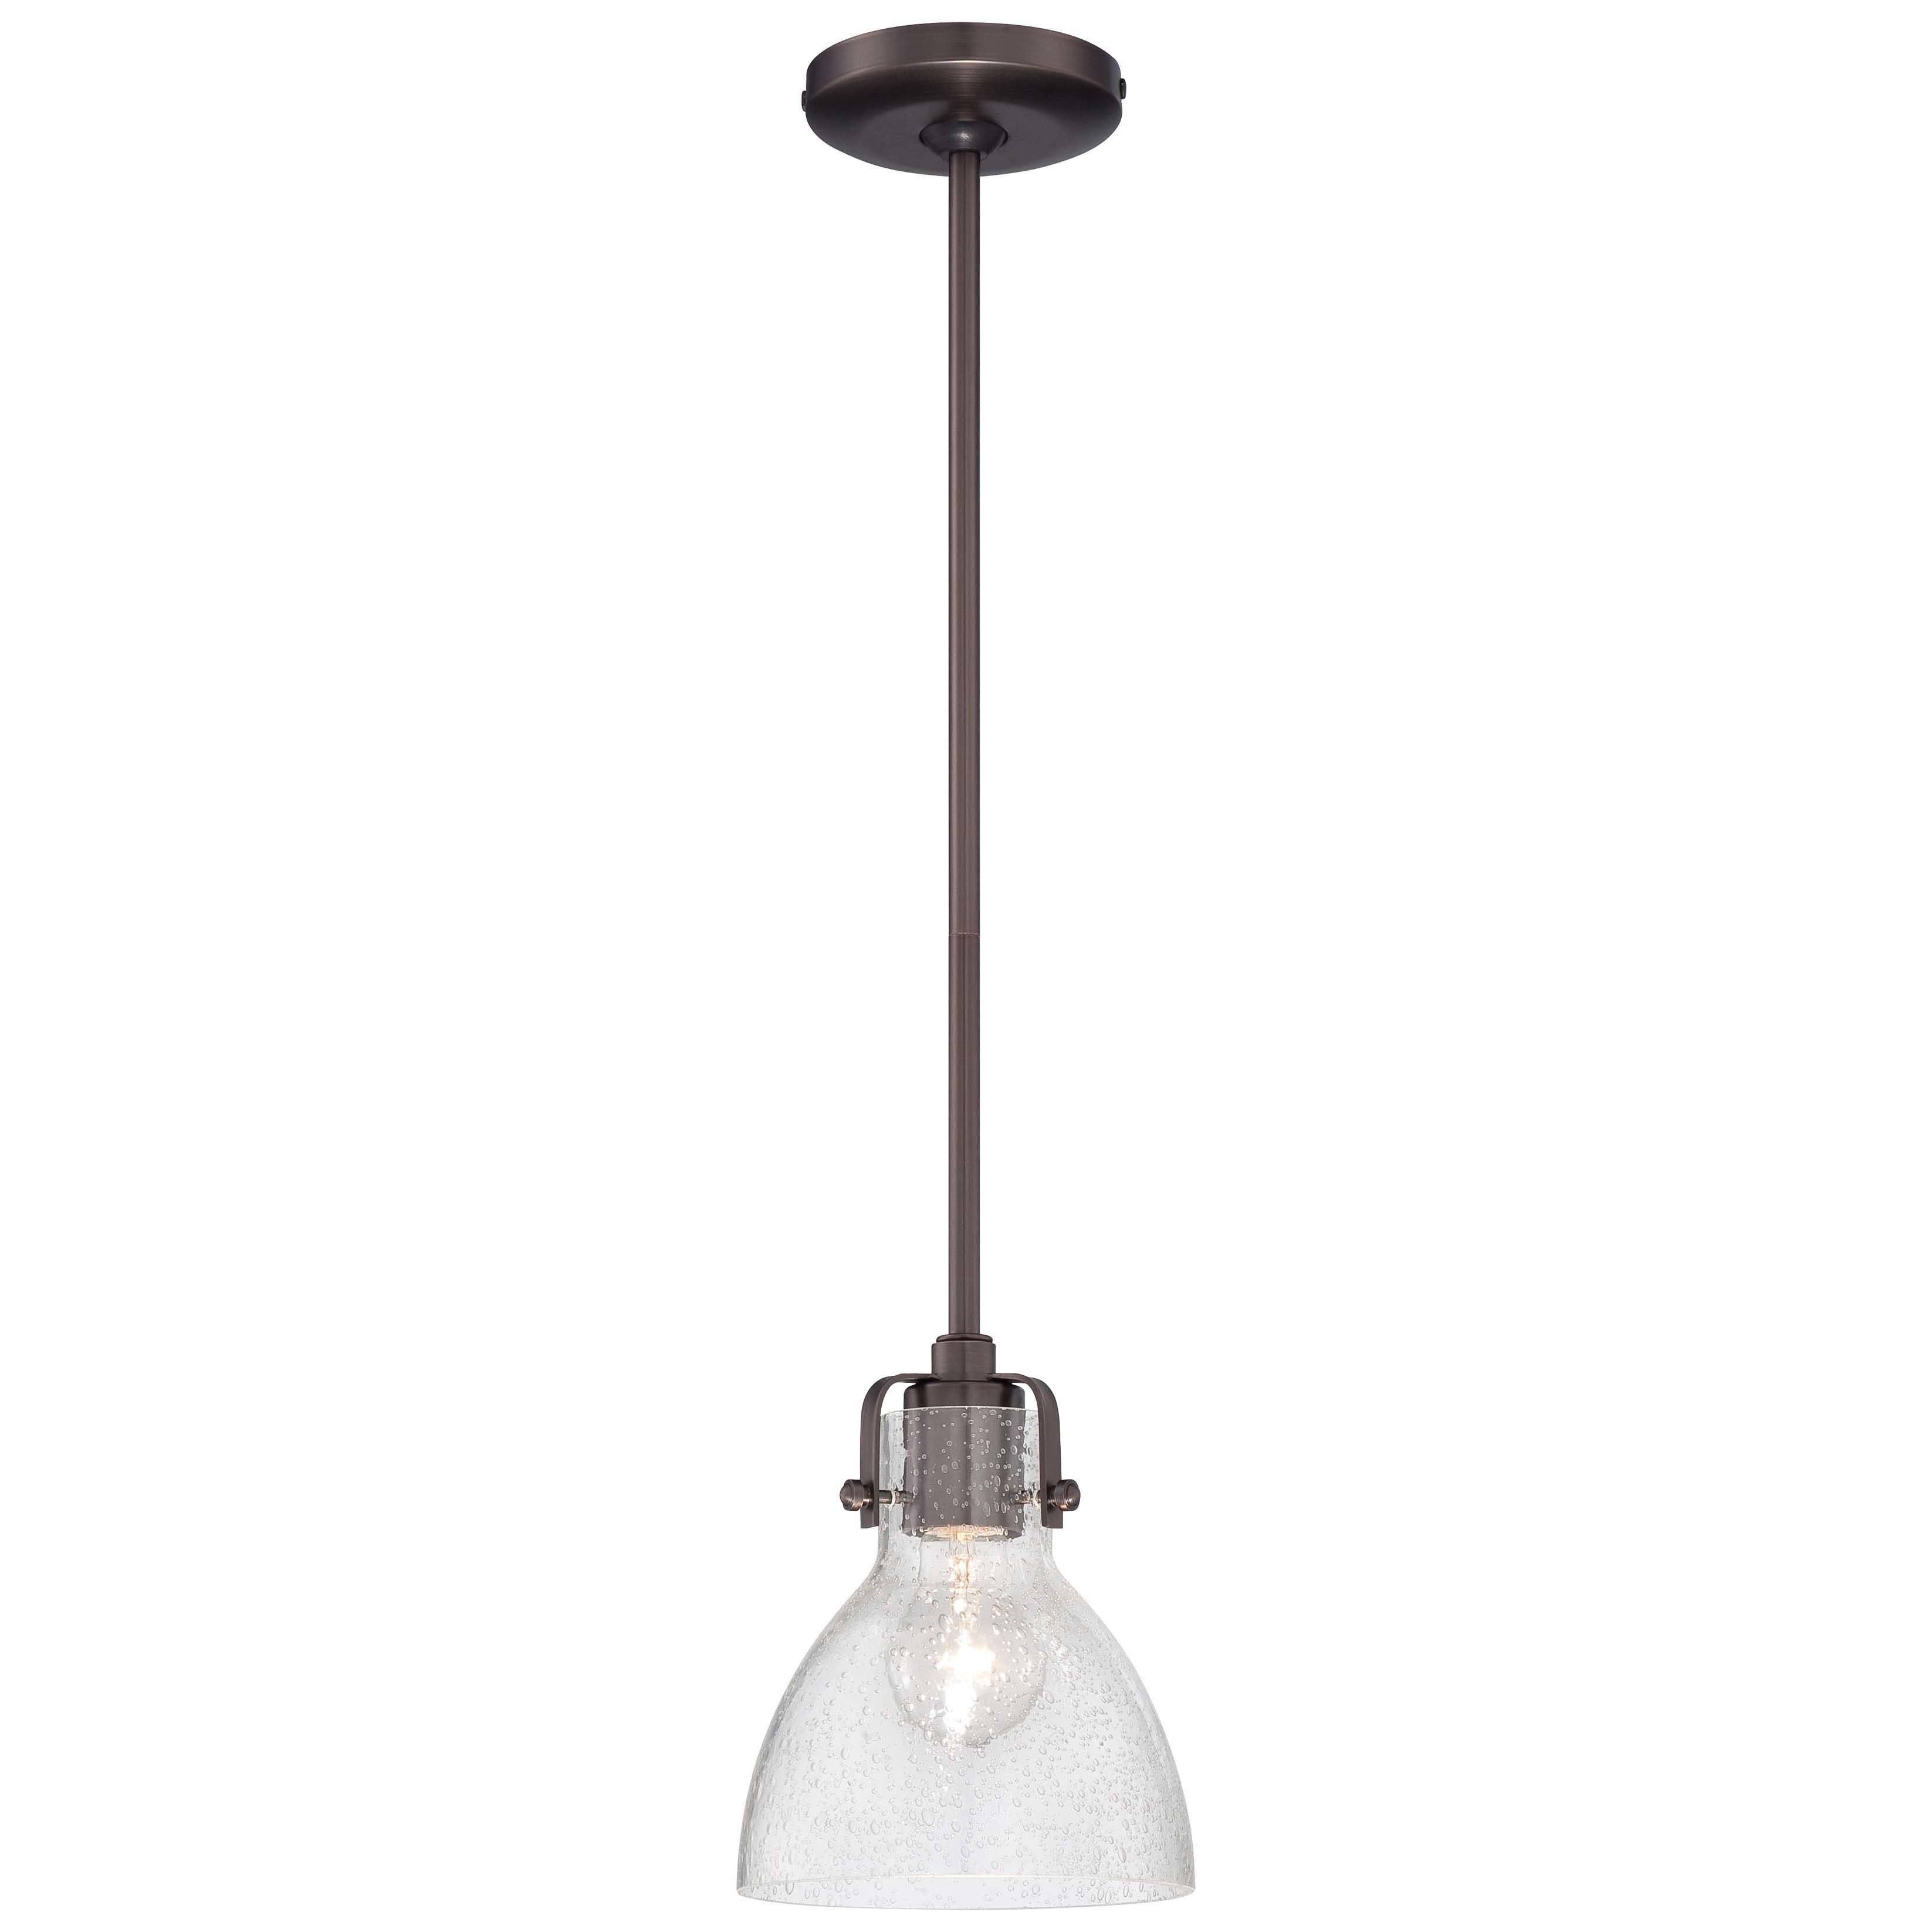 Andover Mills Goldie 1 Light Single Bell Pendant For Wentzville 1 Light Single Bell Pendants (View 14 of 30)